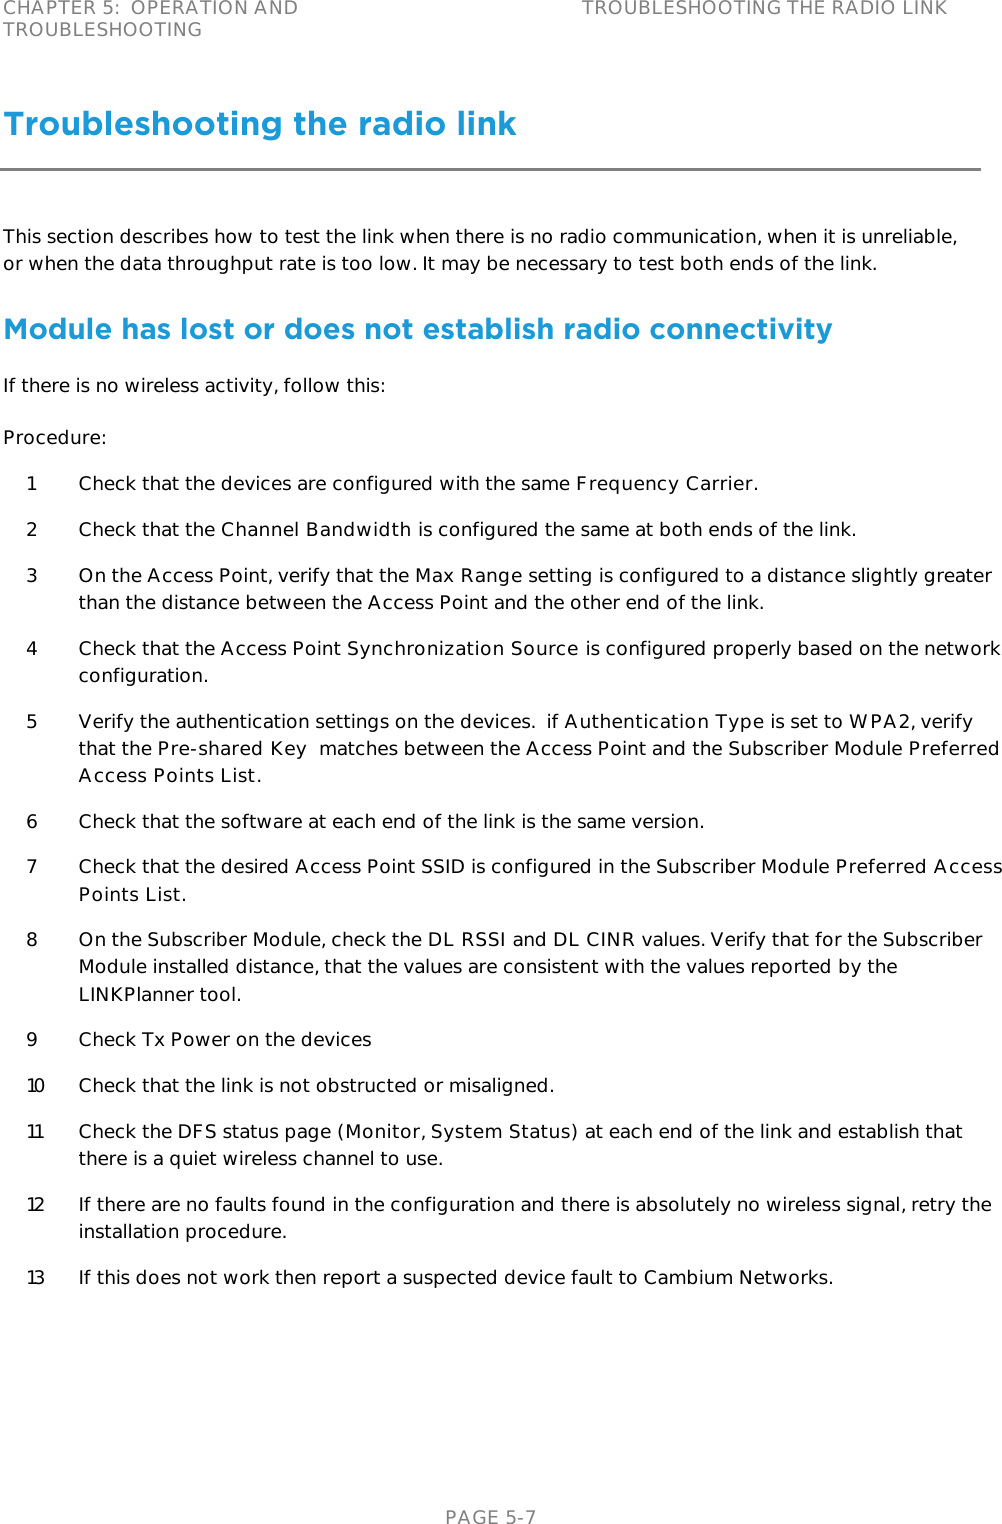 CHAPTER 5:  OPERATION AND TROUBLESHOOTING TROUBLESHOOTING THE RADIO LINK   PAGE 5-7 Troubleshooting the radio link This section describes how to test the link when there is no radio communication, when it is unreliable, or when the data throughput rate is too low. It may be necessary to test both ends of the link. Module has lost or does not establish radio connectivity If there is no wireless activity, follow this: Procedure: 1 Check that the devices are configured with the same Frequency Carrier.  2 Check that the Channel Bandwidth is configured the same at both ends of the link. 3 On the Access Point, verify that the Max Range setting is configured to a distance slightly greater than the distance between the Access Point and the other end of the link. 4 Check that the Access Point Synchronization Source is configured properly based on the network configuration. 5 Verify the authentication settings on the devices.  if Authentication Type is set to WPA2, verify that the Pre-shared Key  matches between the Access Point and the Subscriber Module Preferred Access Points List. 6 Check that the software at each end of the link is the same version. 7 Check that the desired Access Point SSID is configured in the Subscriber Module Preferred Access Points List. 8 On the Subscriber Module, check the DL RSSI and DL CINR values. Verify that for the Subscriber Module installed distance, that the values are consistent with the values reported by the LINKPlanner tool. 9 Check Tx Power on the devices 10 Check that the link is not obstructed or misaligned. 11 Check the DFS status page (Monitor, System Status) at each end of the link and establish that there is a quiet wireless channel to use. 12 If there are no faults found in the configuration and there is absolutely no wireless signal, retry the installation procedure.  13 If this does not work then report a suspected device fault to Cambium Networks.  